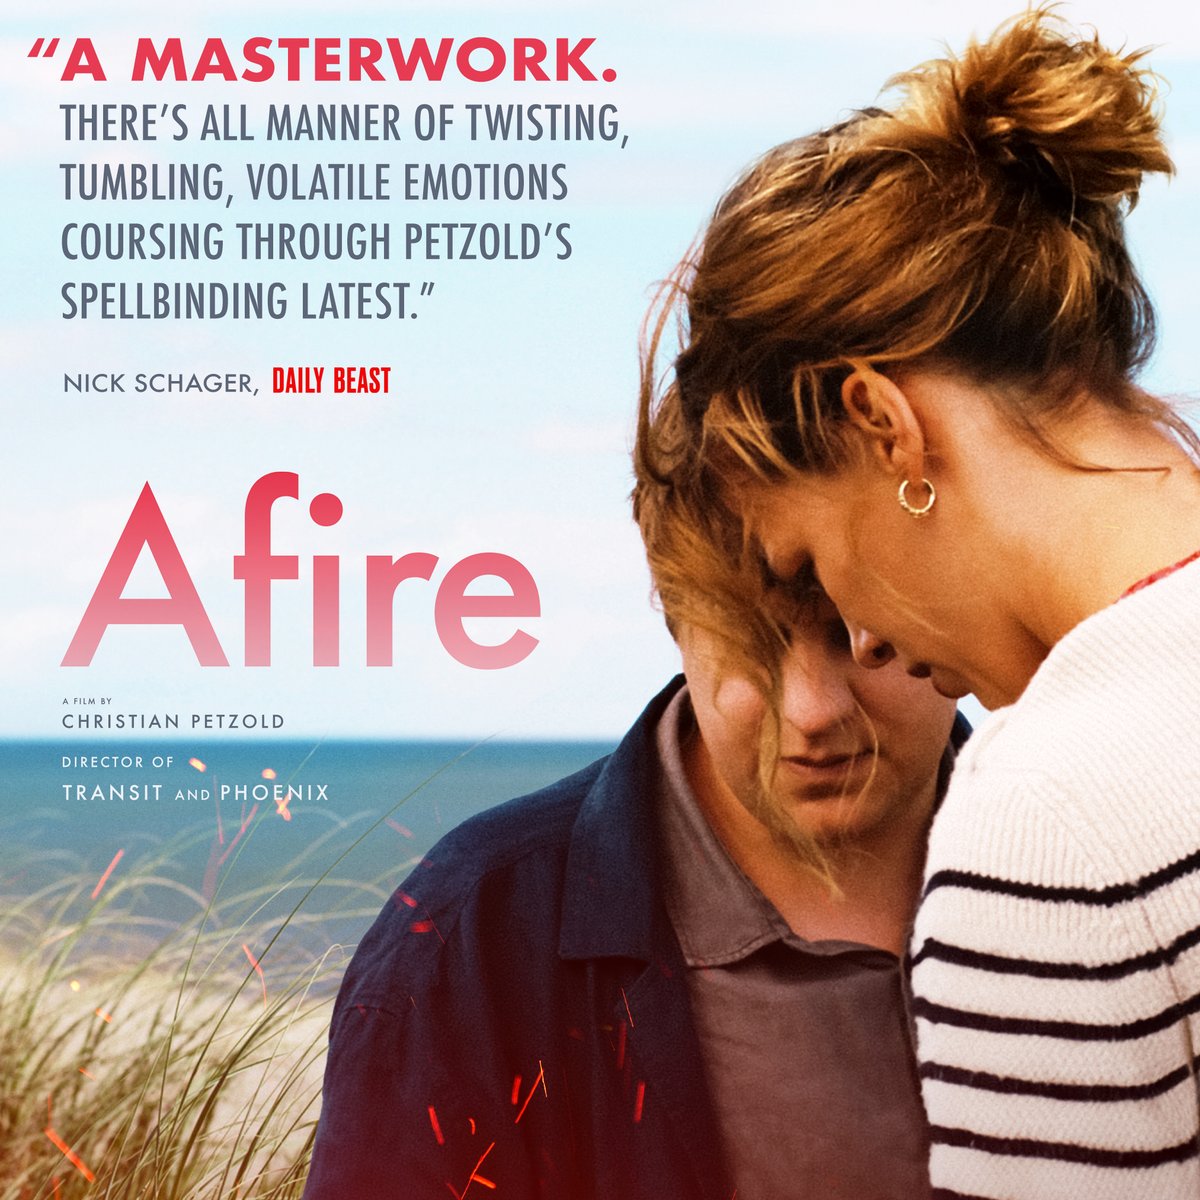 “A masterpiece.” -@thefilmstage A seaside vacation takes an unexpected turn in the latest from master director Christian Petzold. Winner of the Silver Bear Grand Jury Prize at this year’s Berlinale, AFIRE is coming to @roxietheater, opening Friday, 8/4 🎫afire.film